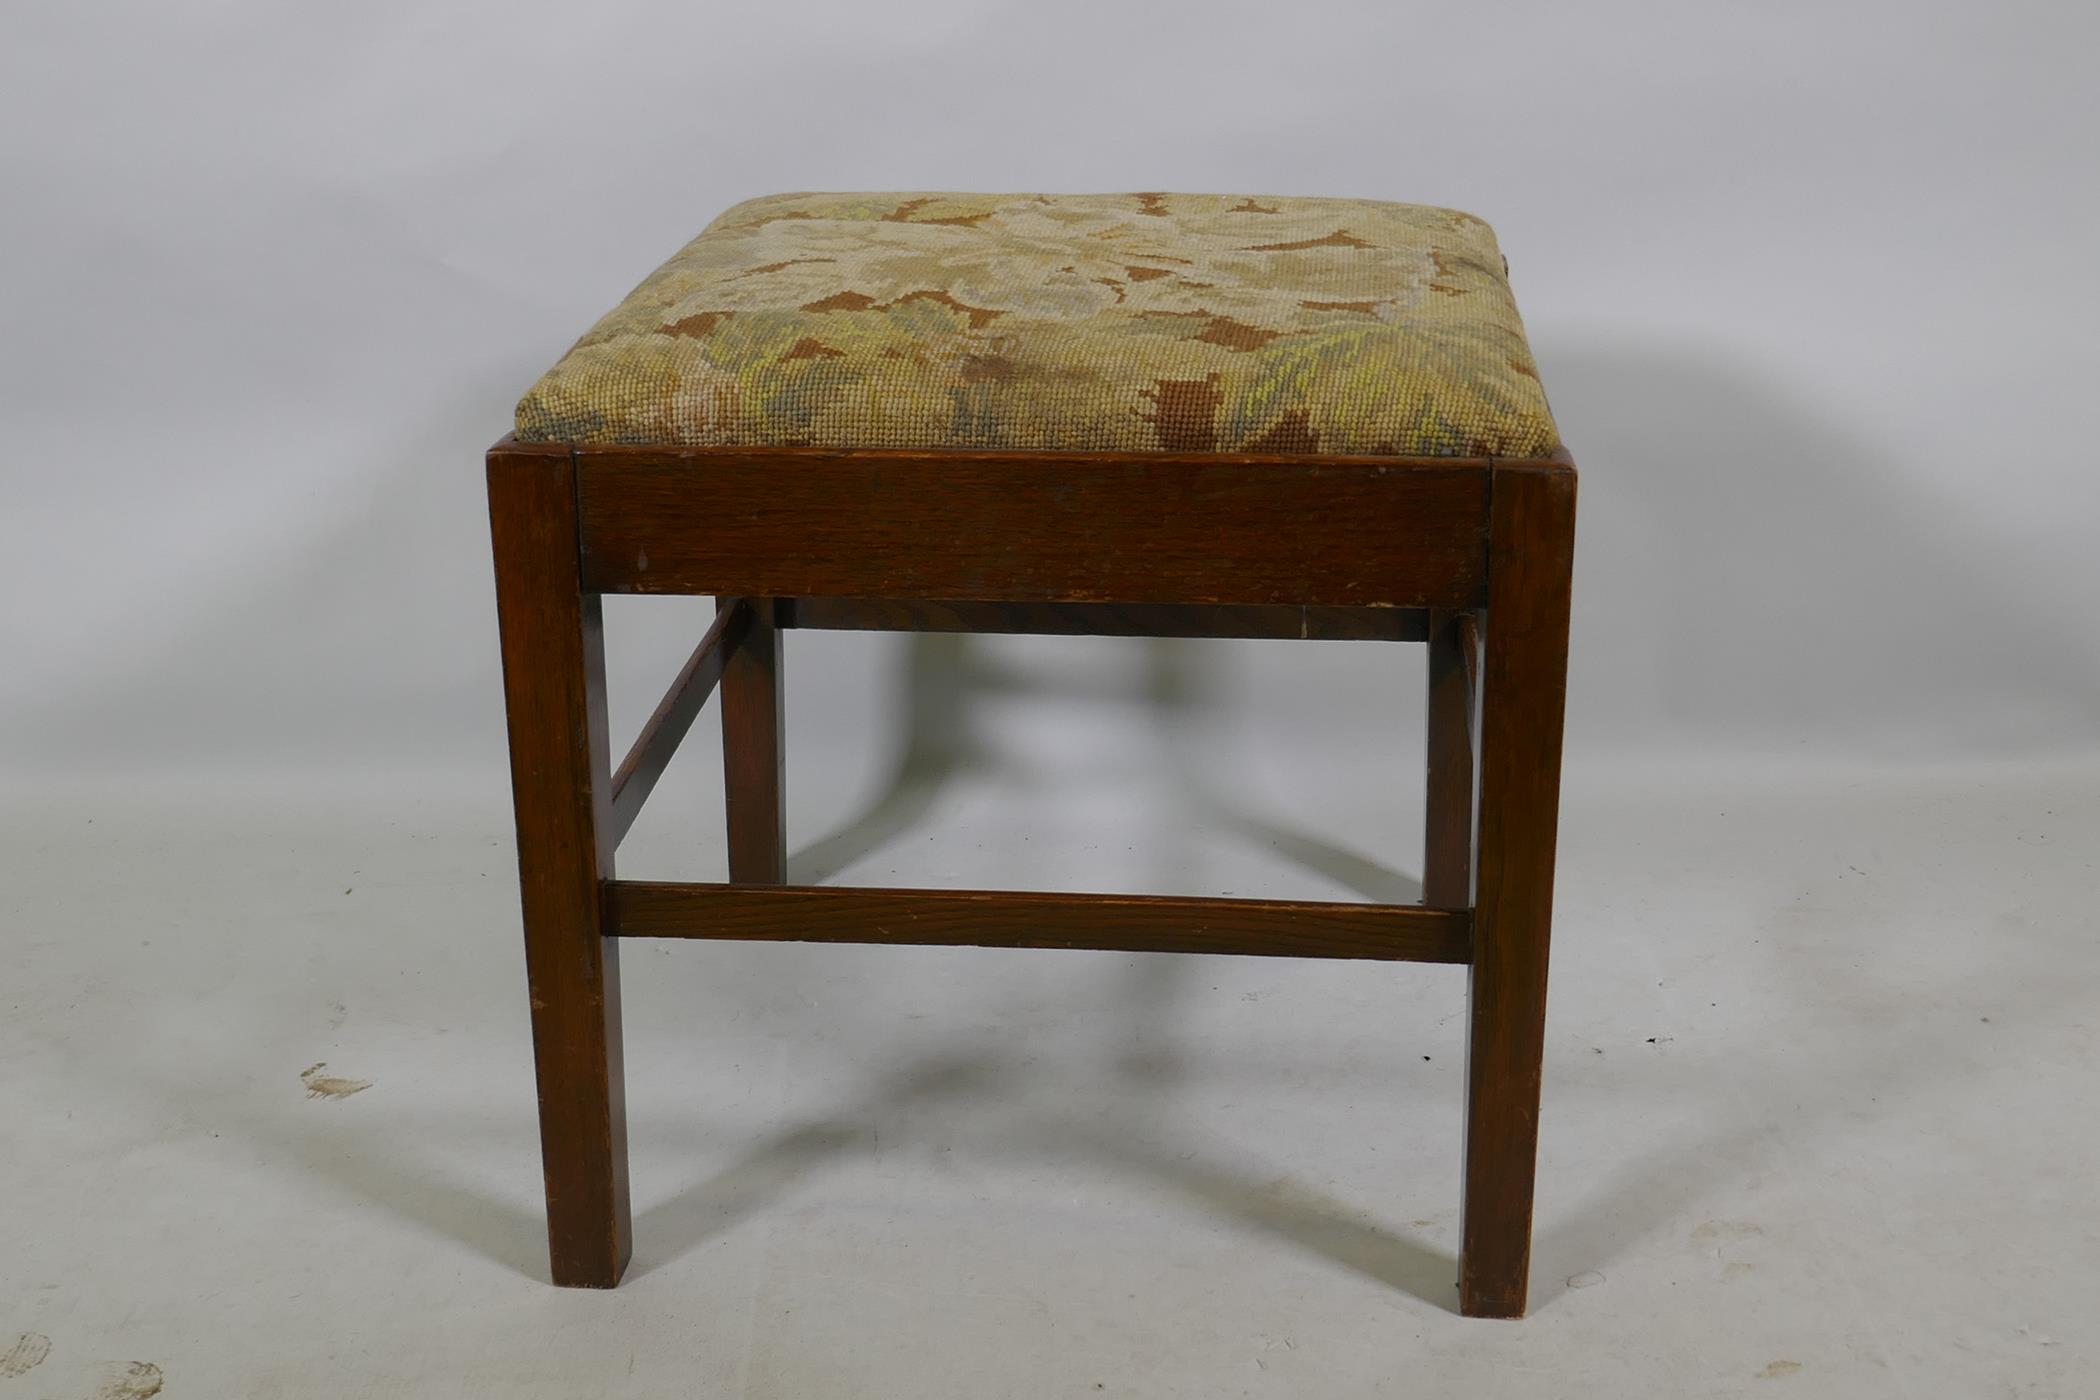 A C19th oak footstool with drop in tapestry seat, 45 x 45 x 45cm - Image 2 of 2